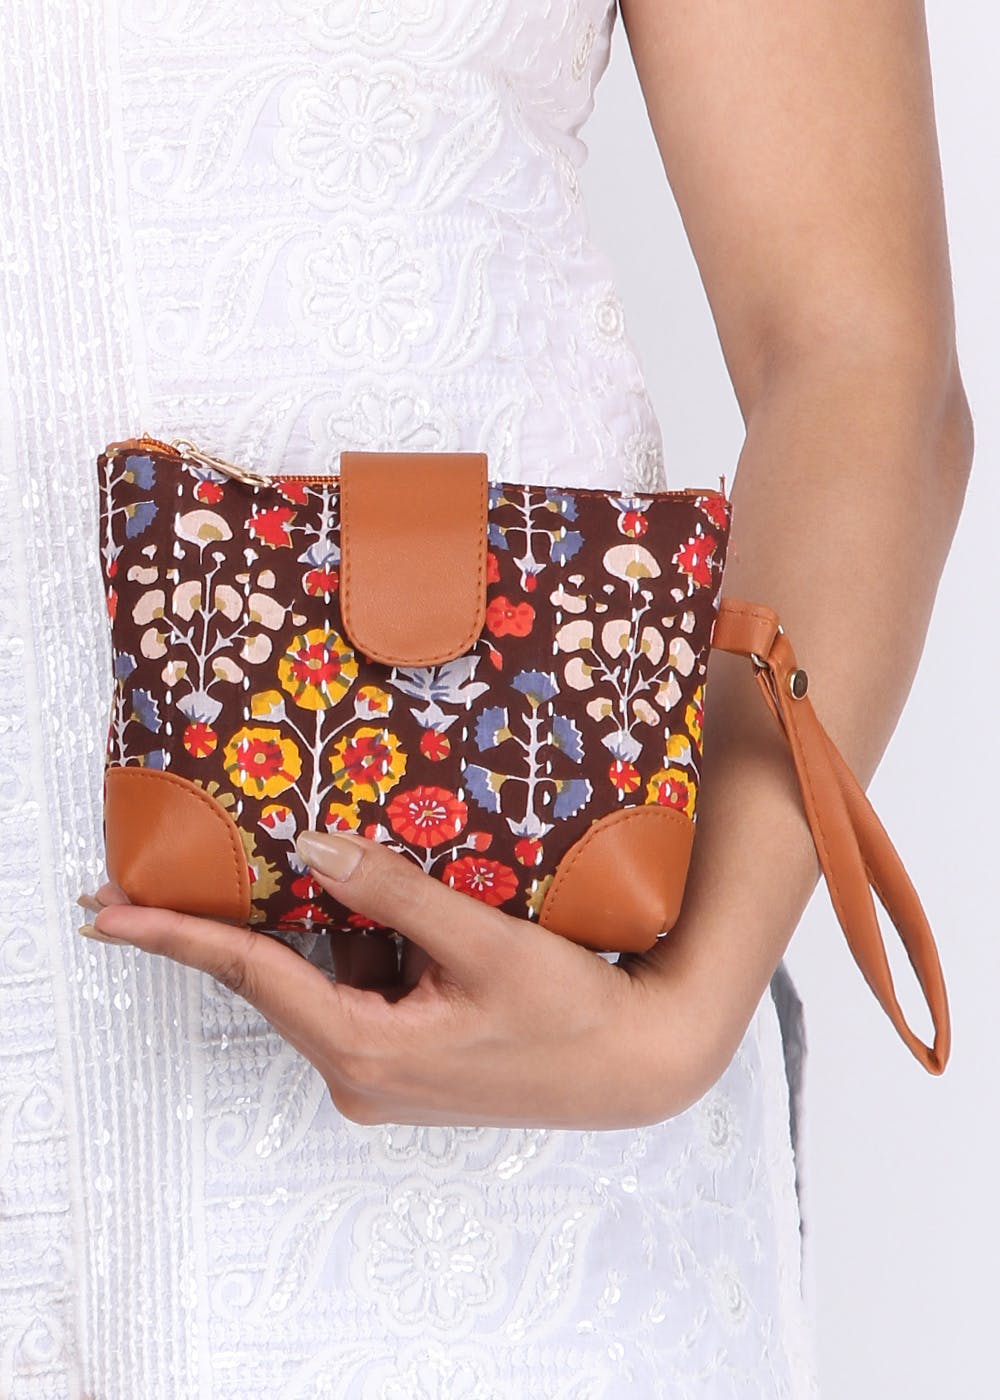 Eshopeee - Shop Online For the Best Bags, Women's Fashion | LBB